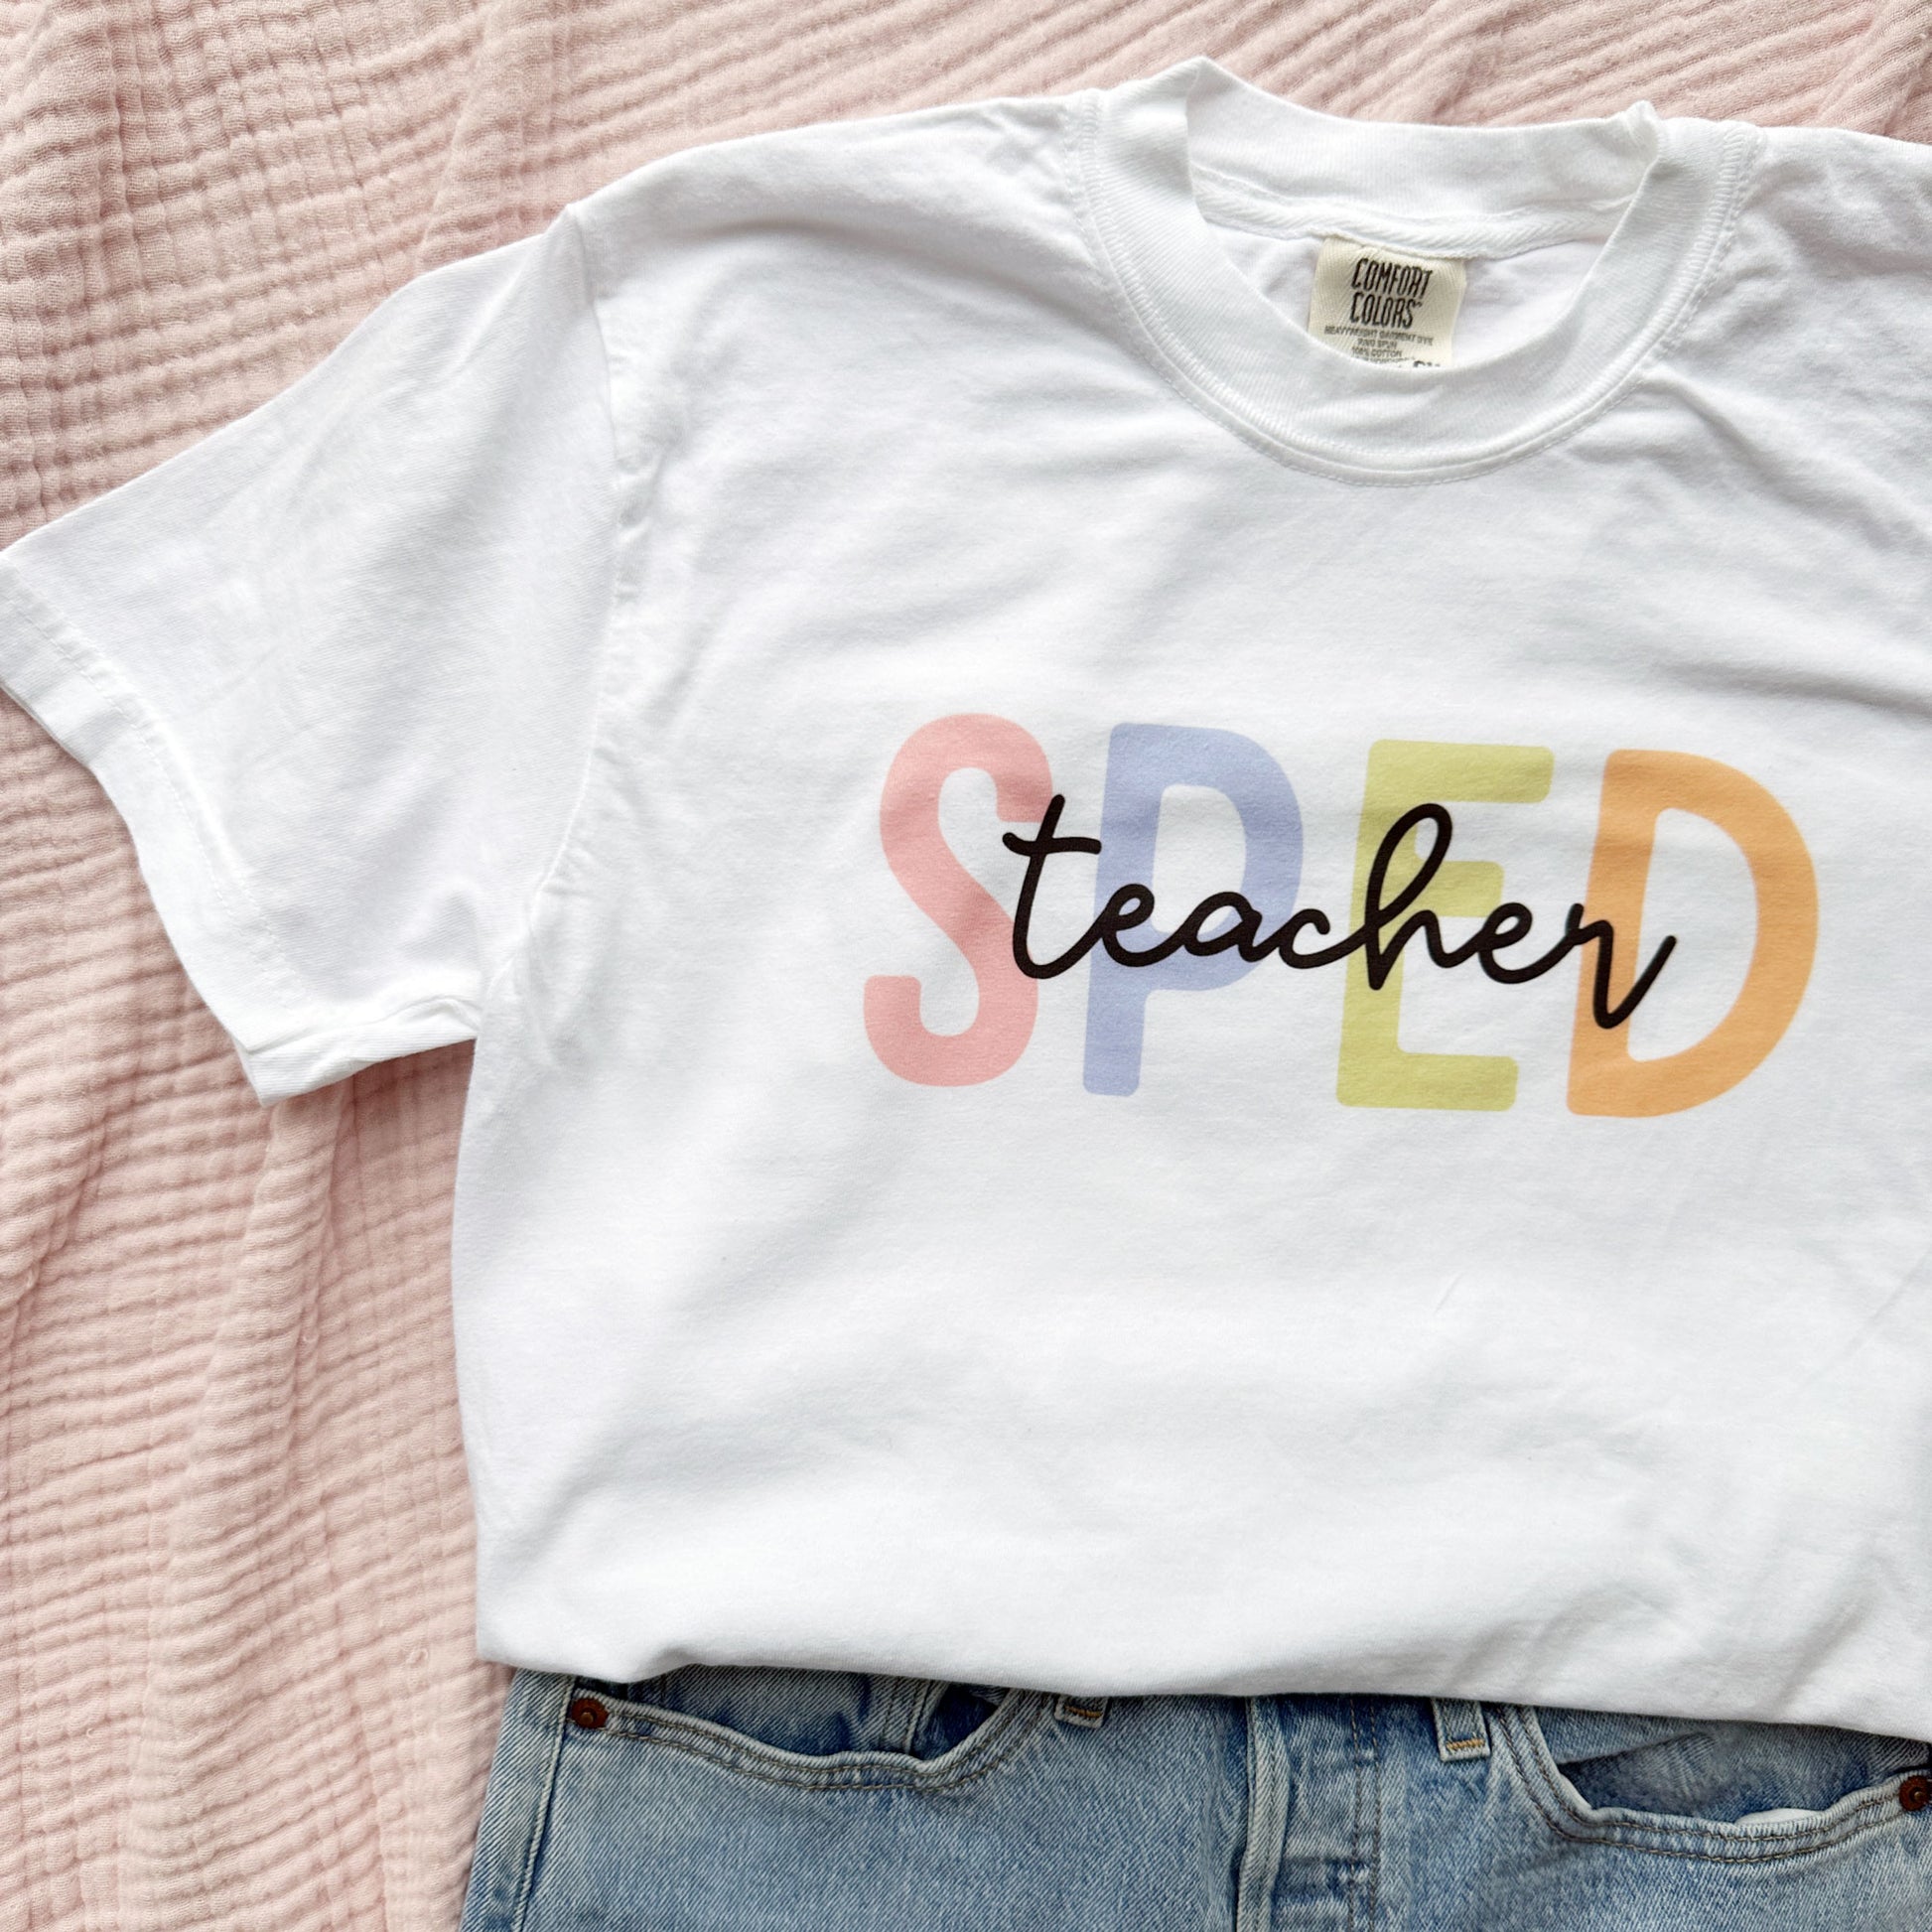 white crewneck tee with a colorful SPED teacher printed design on the front